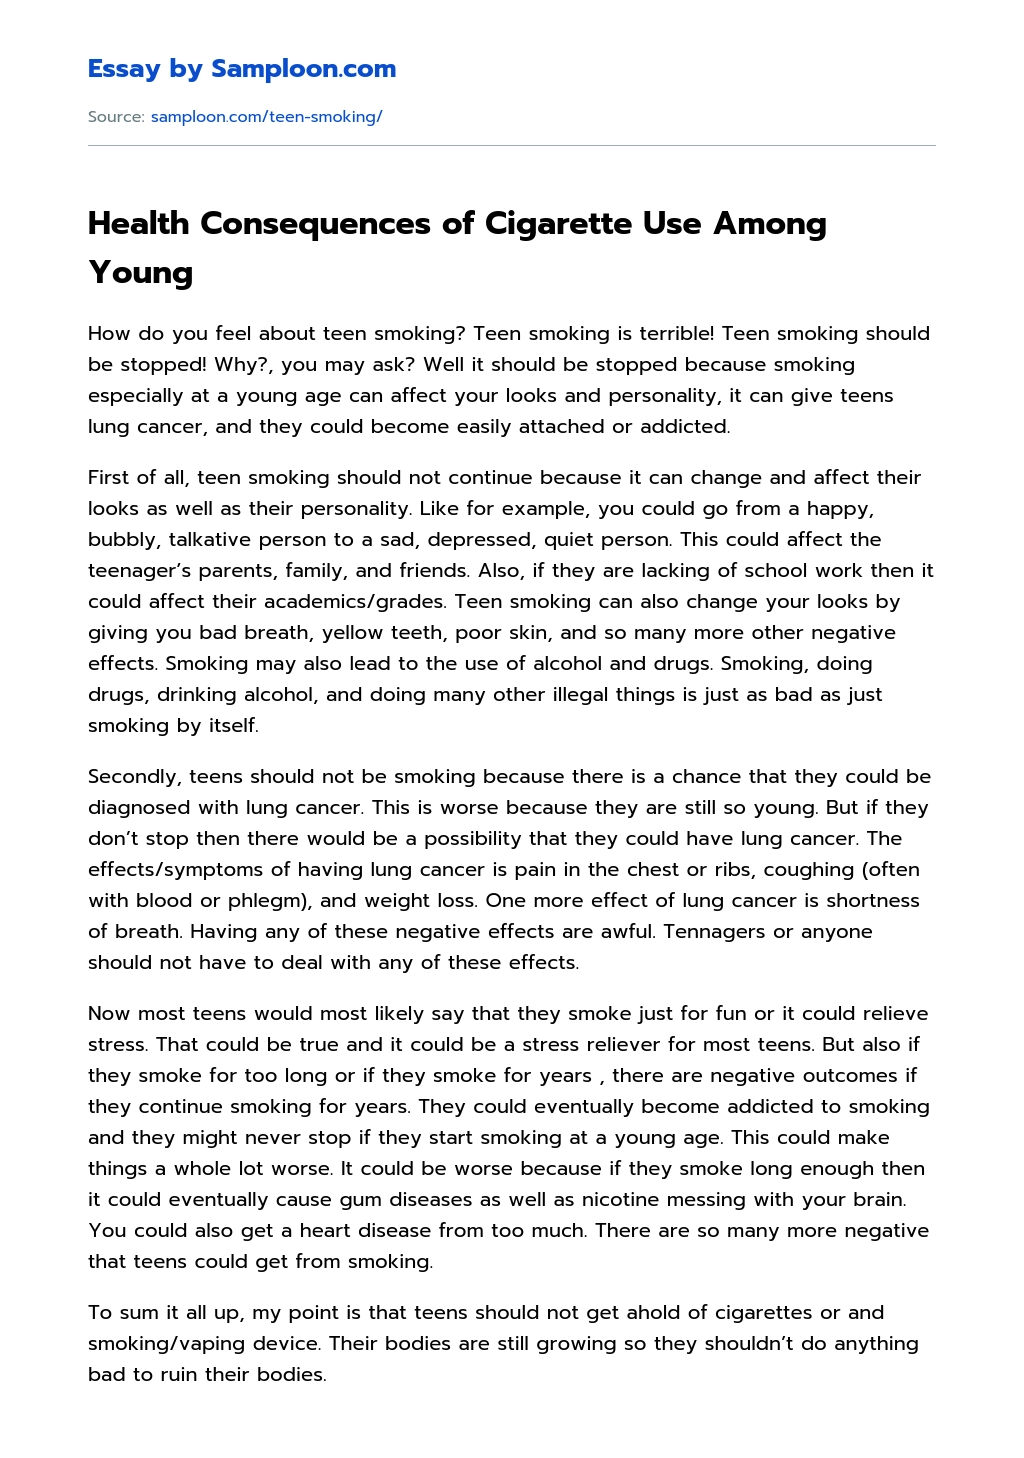 Health Consequences of Cigarette Use Among Young Argumentative Essay essay